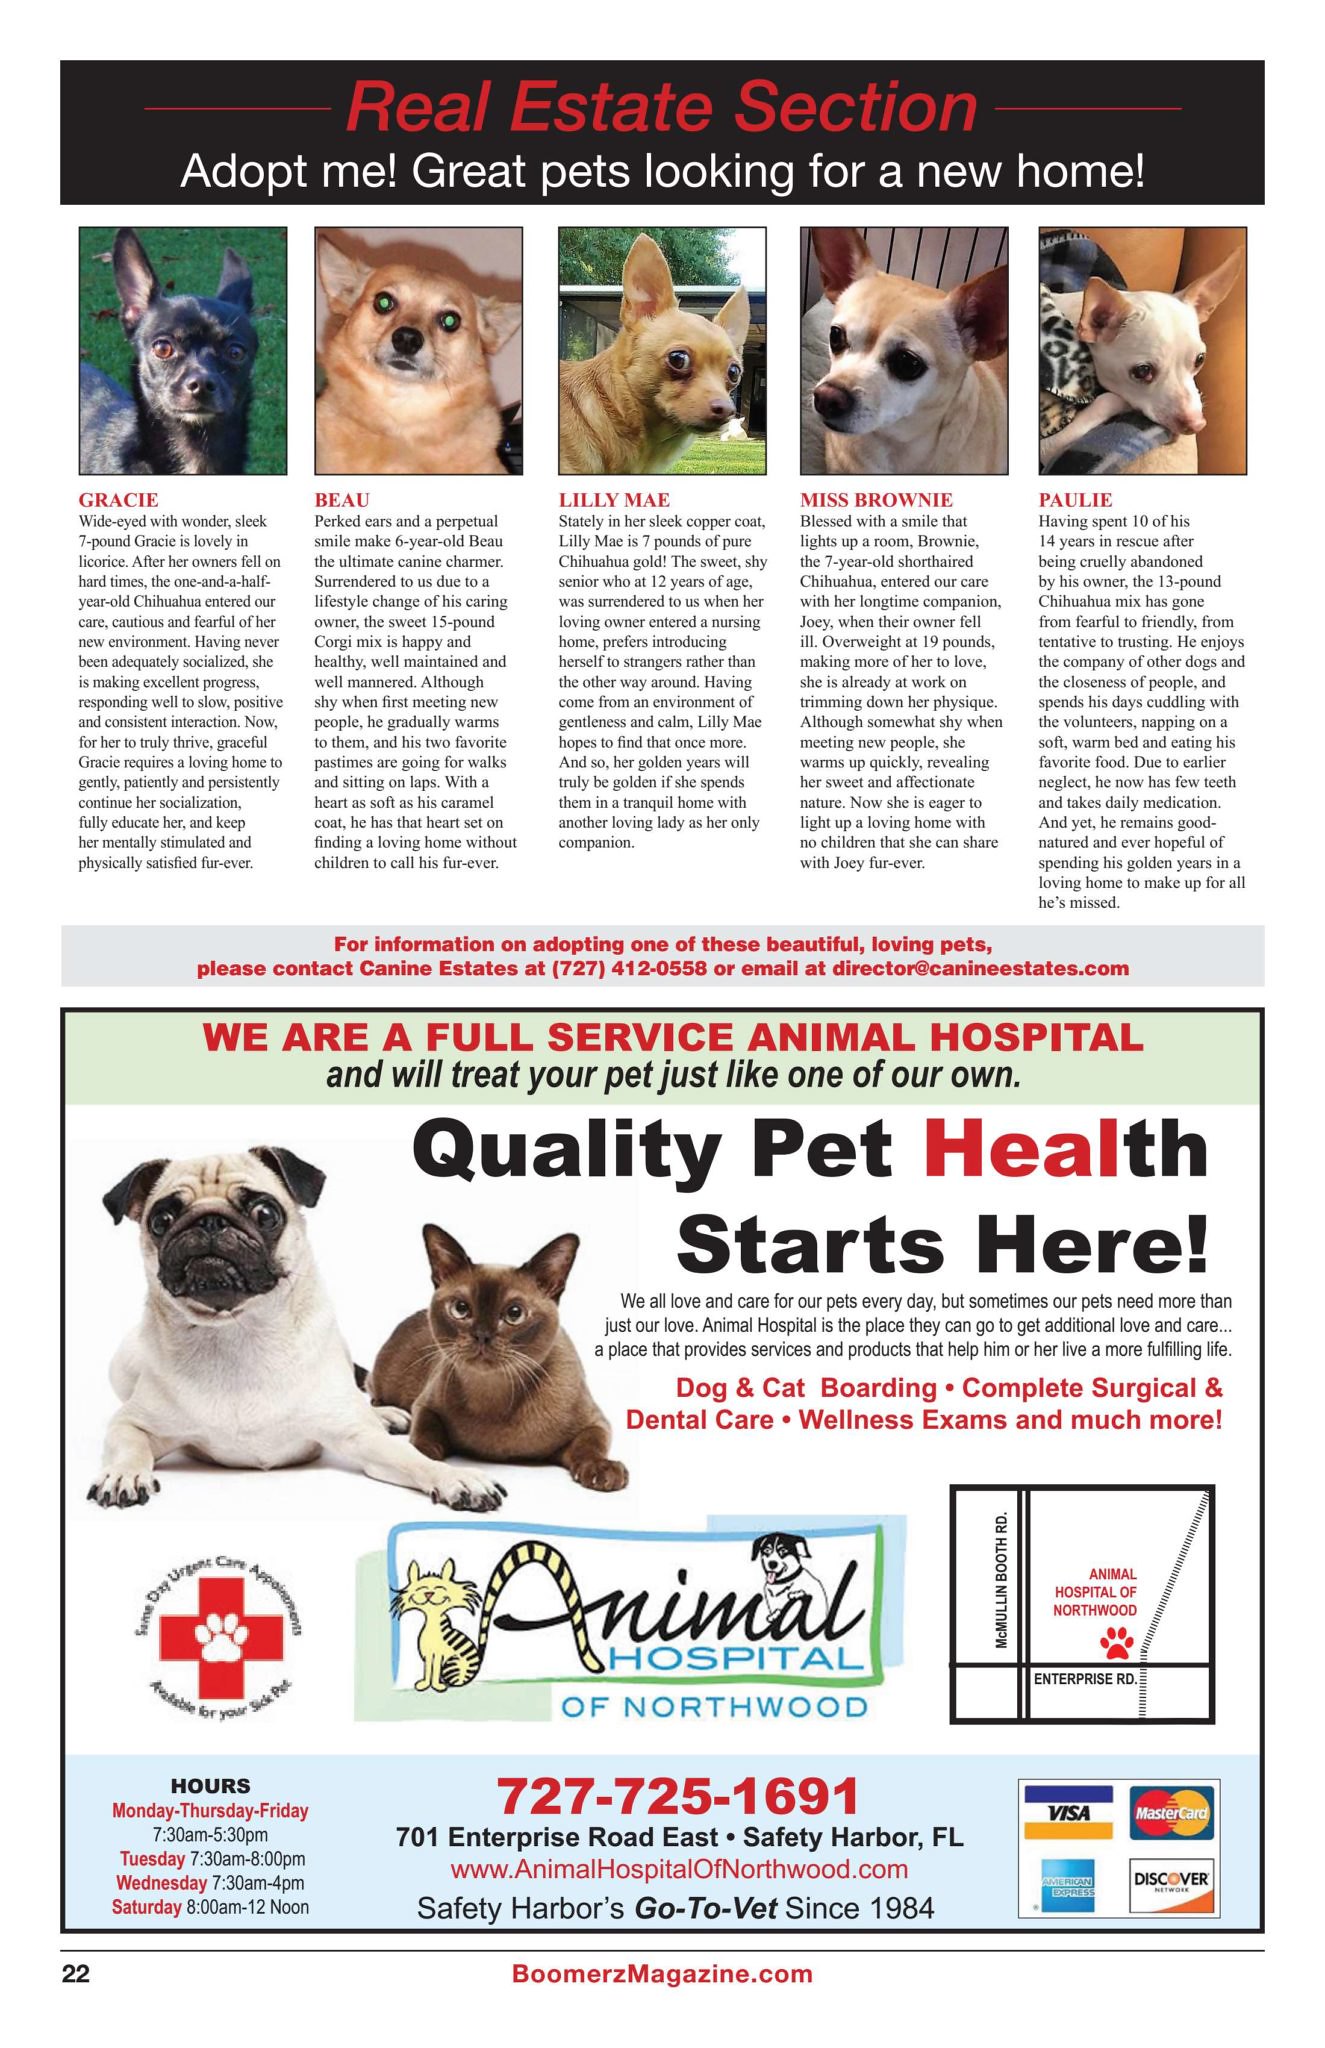 Boomerz Magazine 2018 November Real Estate Section Adopt me pets looking for a new home